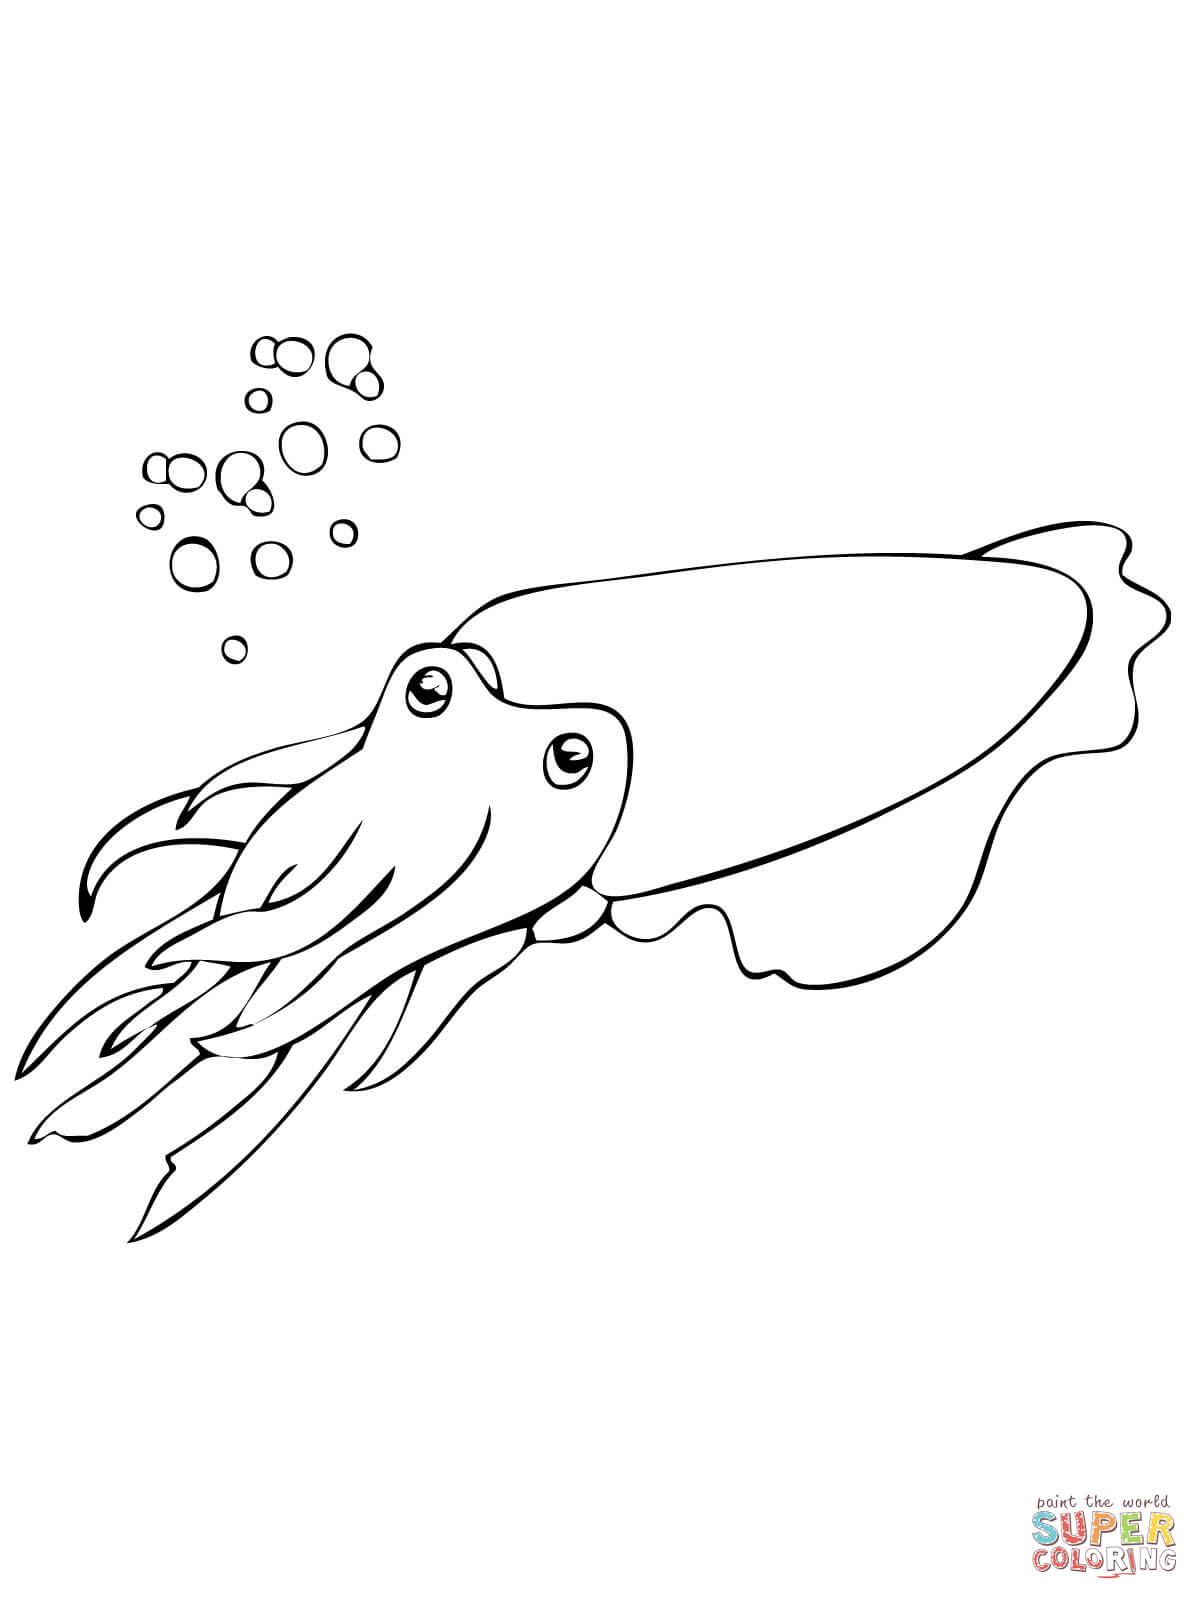 Cuttlefish coloring #8, Download drawings